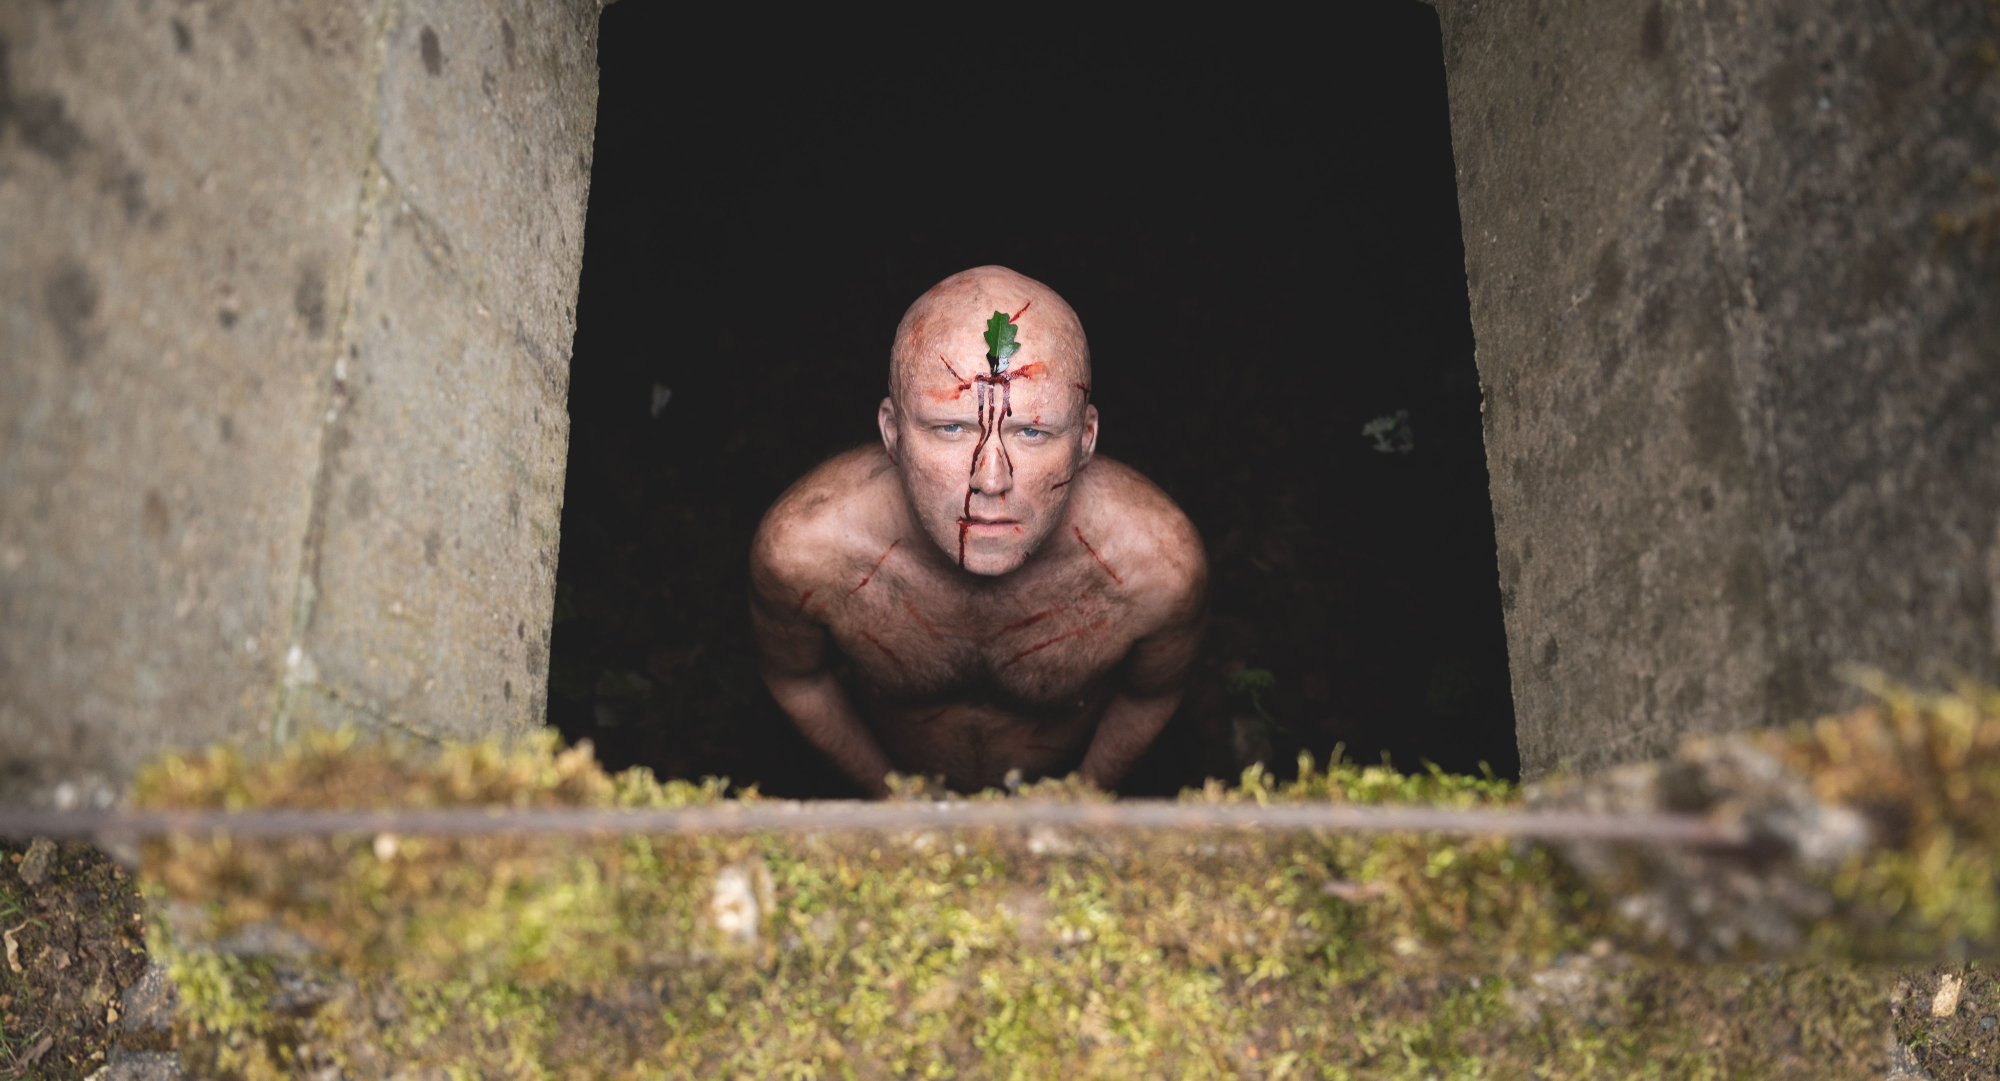 'Men' Rory Kinnear as Geoffrey looking up, naked with a leaf attached to his forehead